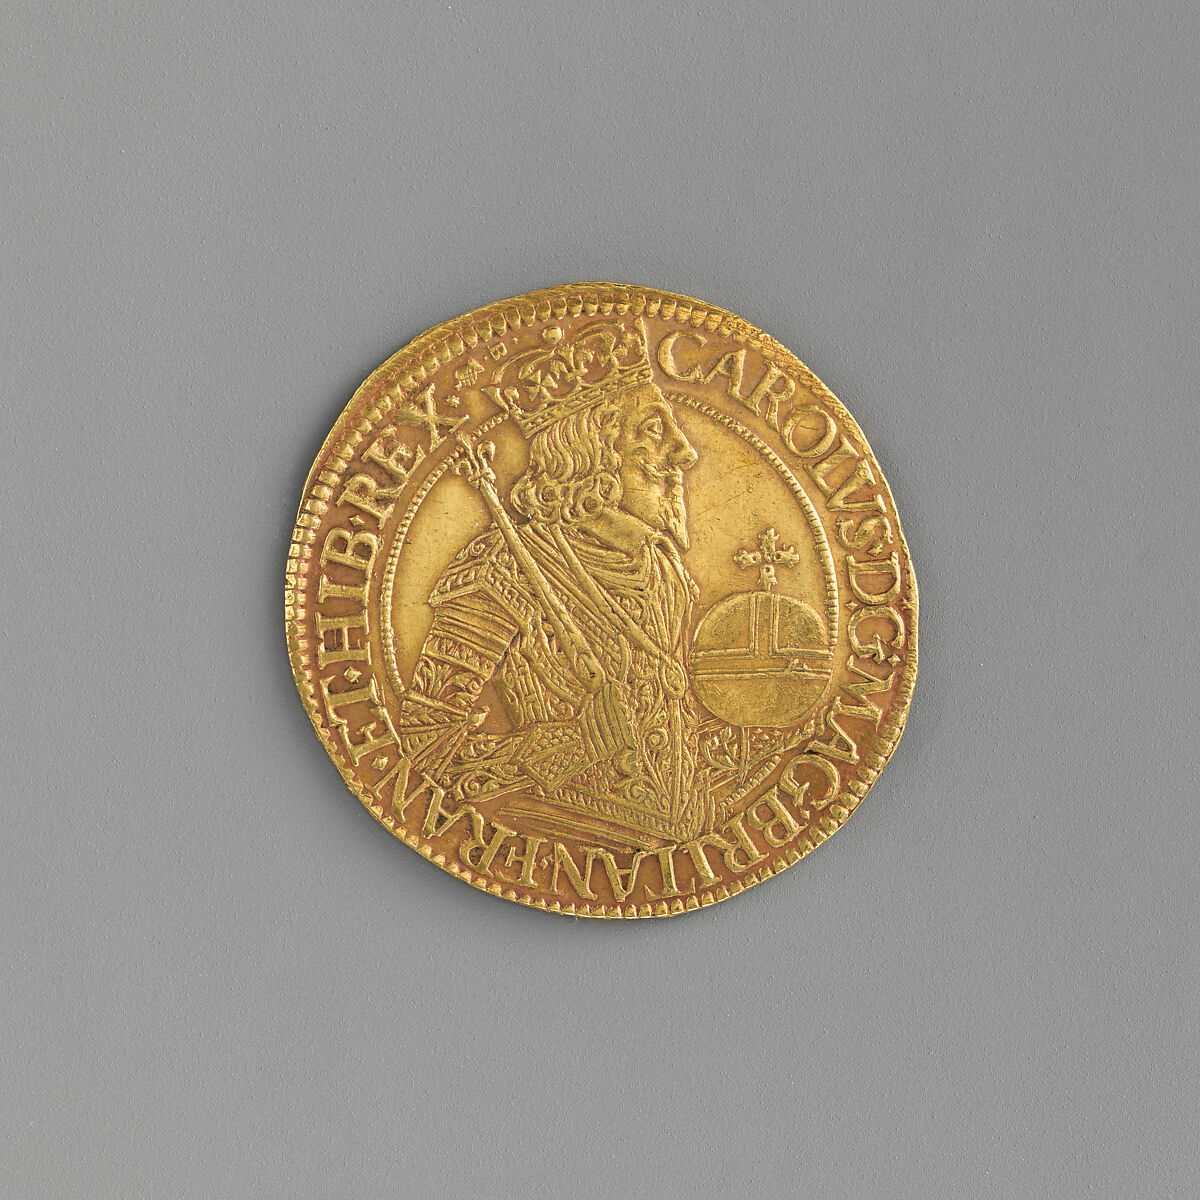 Unite coin of Charles I, Medalist: Nicholas Briot (French, 1579–1646, active England after 1633), Gold, British 